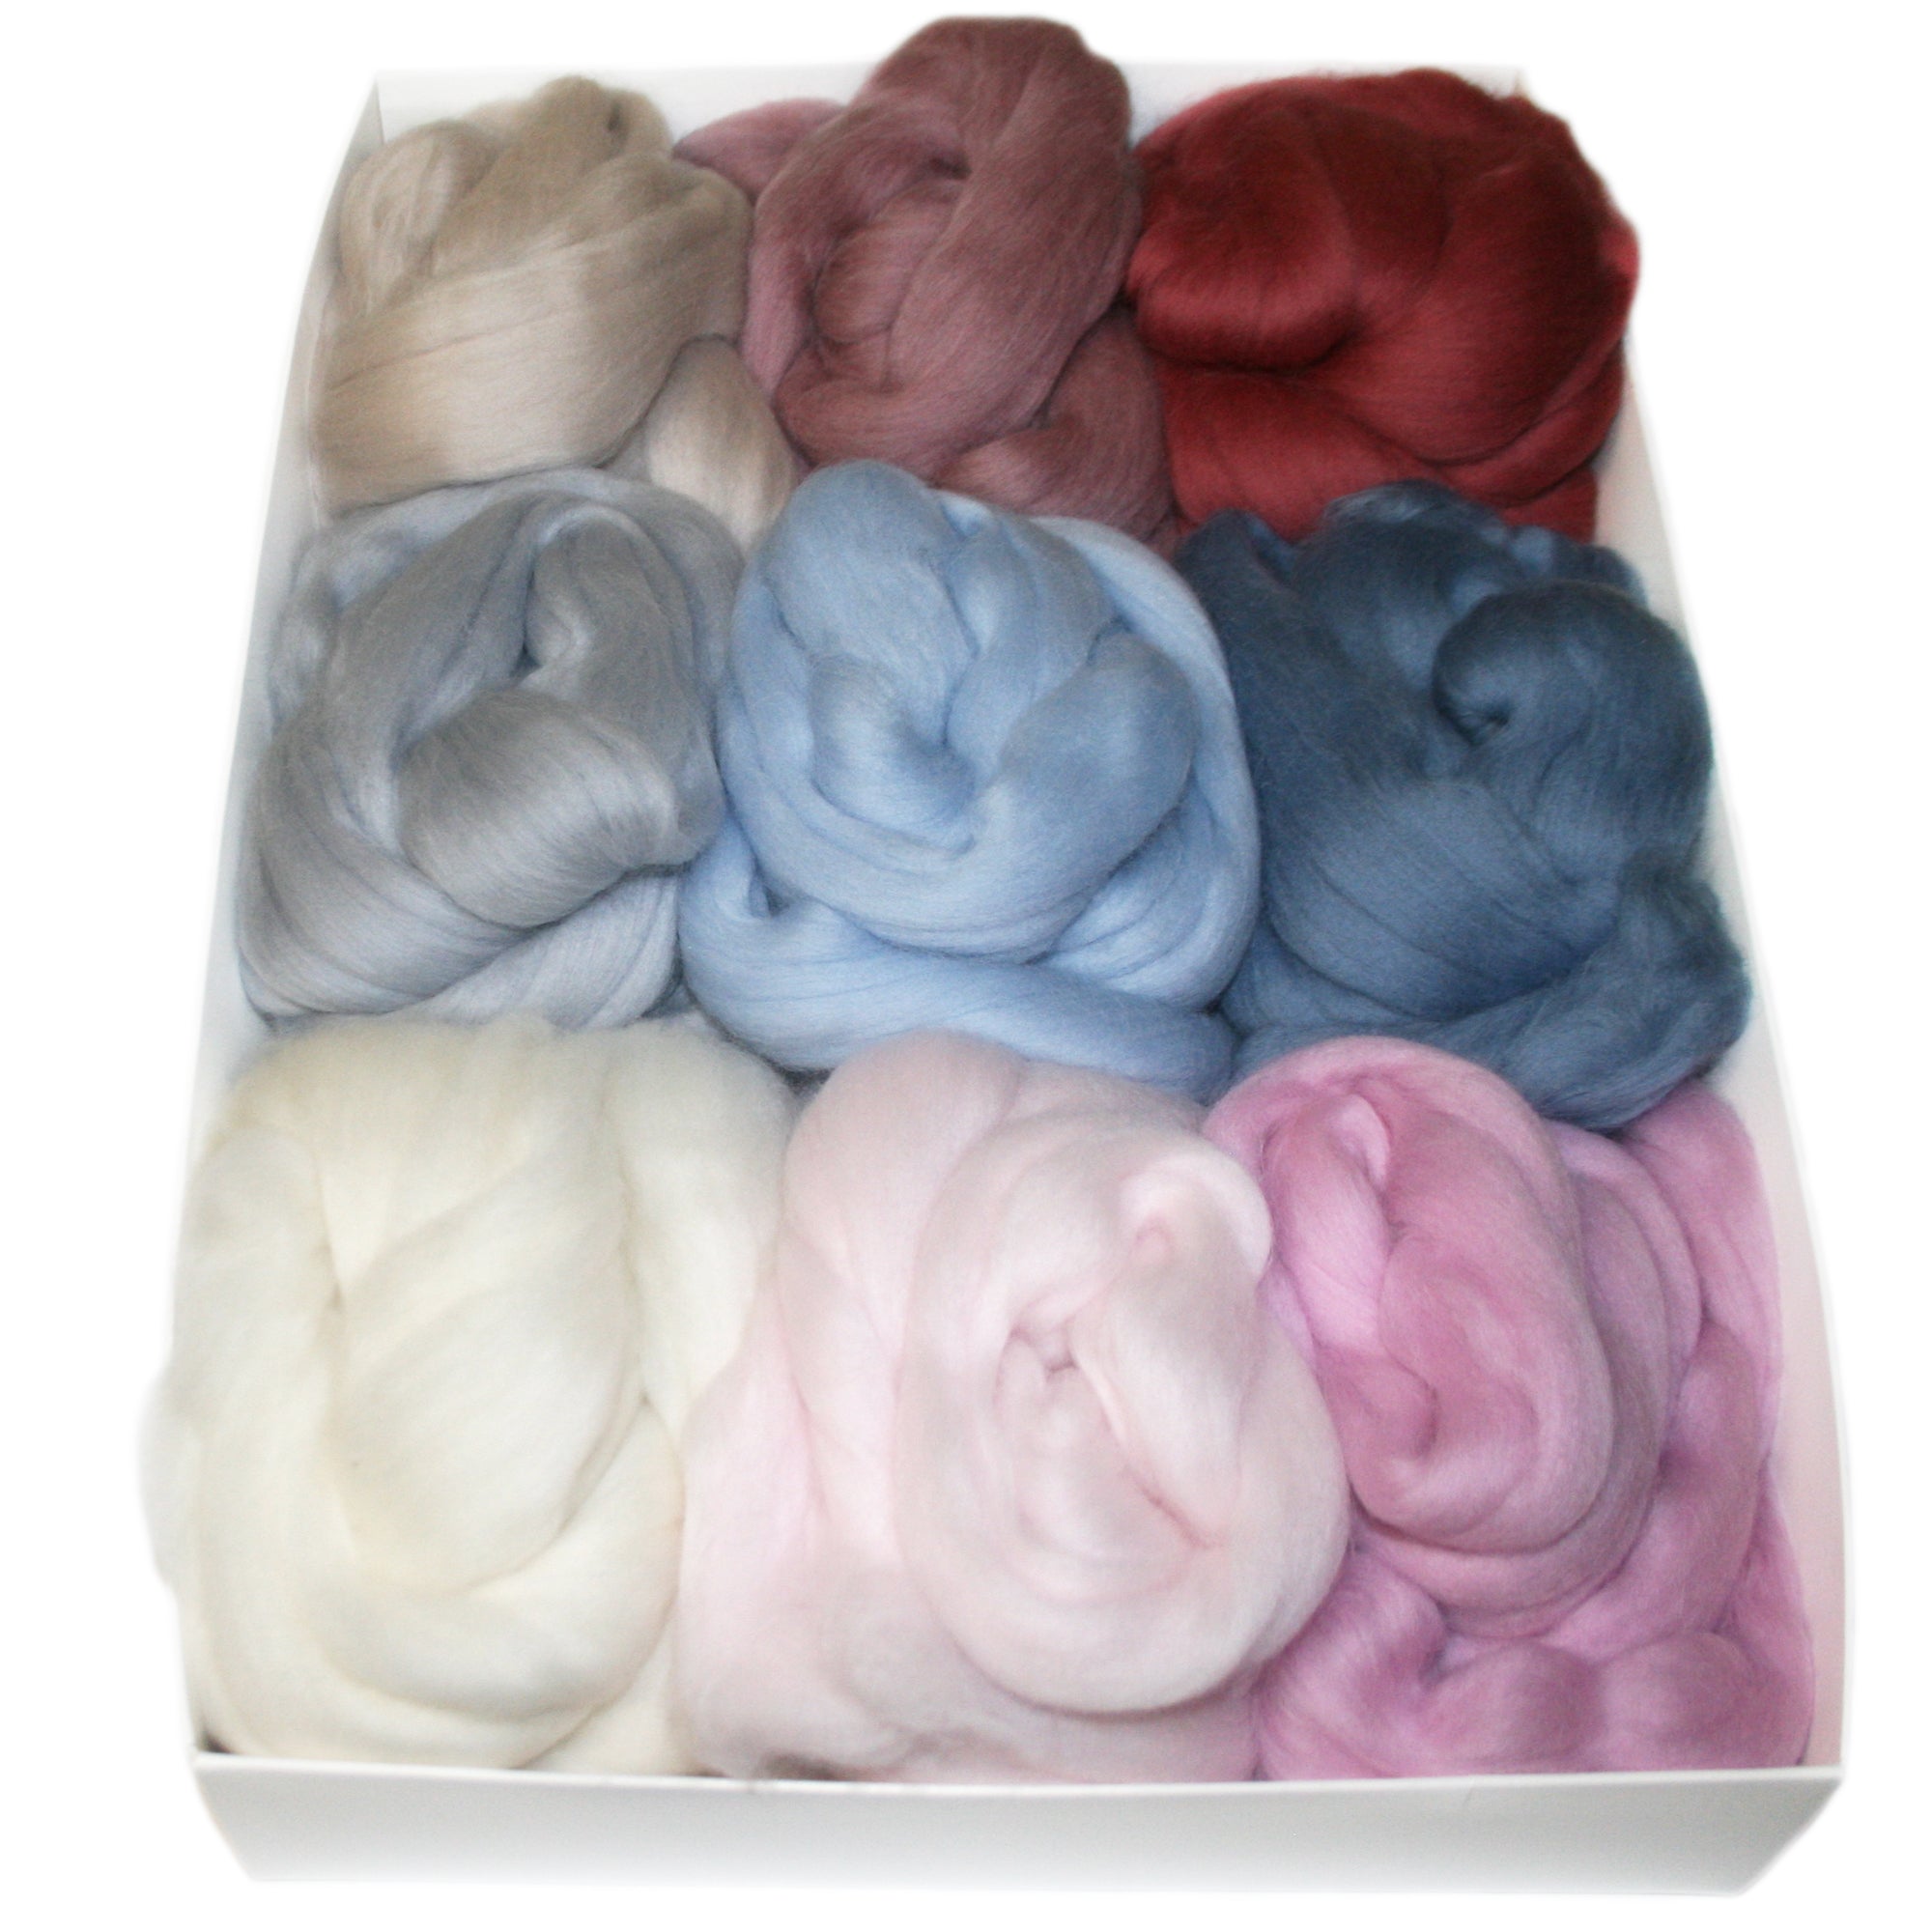 Coloured Wool Top Box of 9 - Pretty Pastels